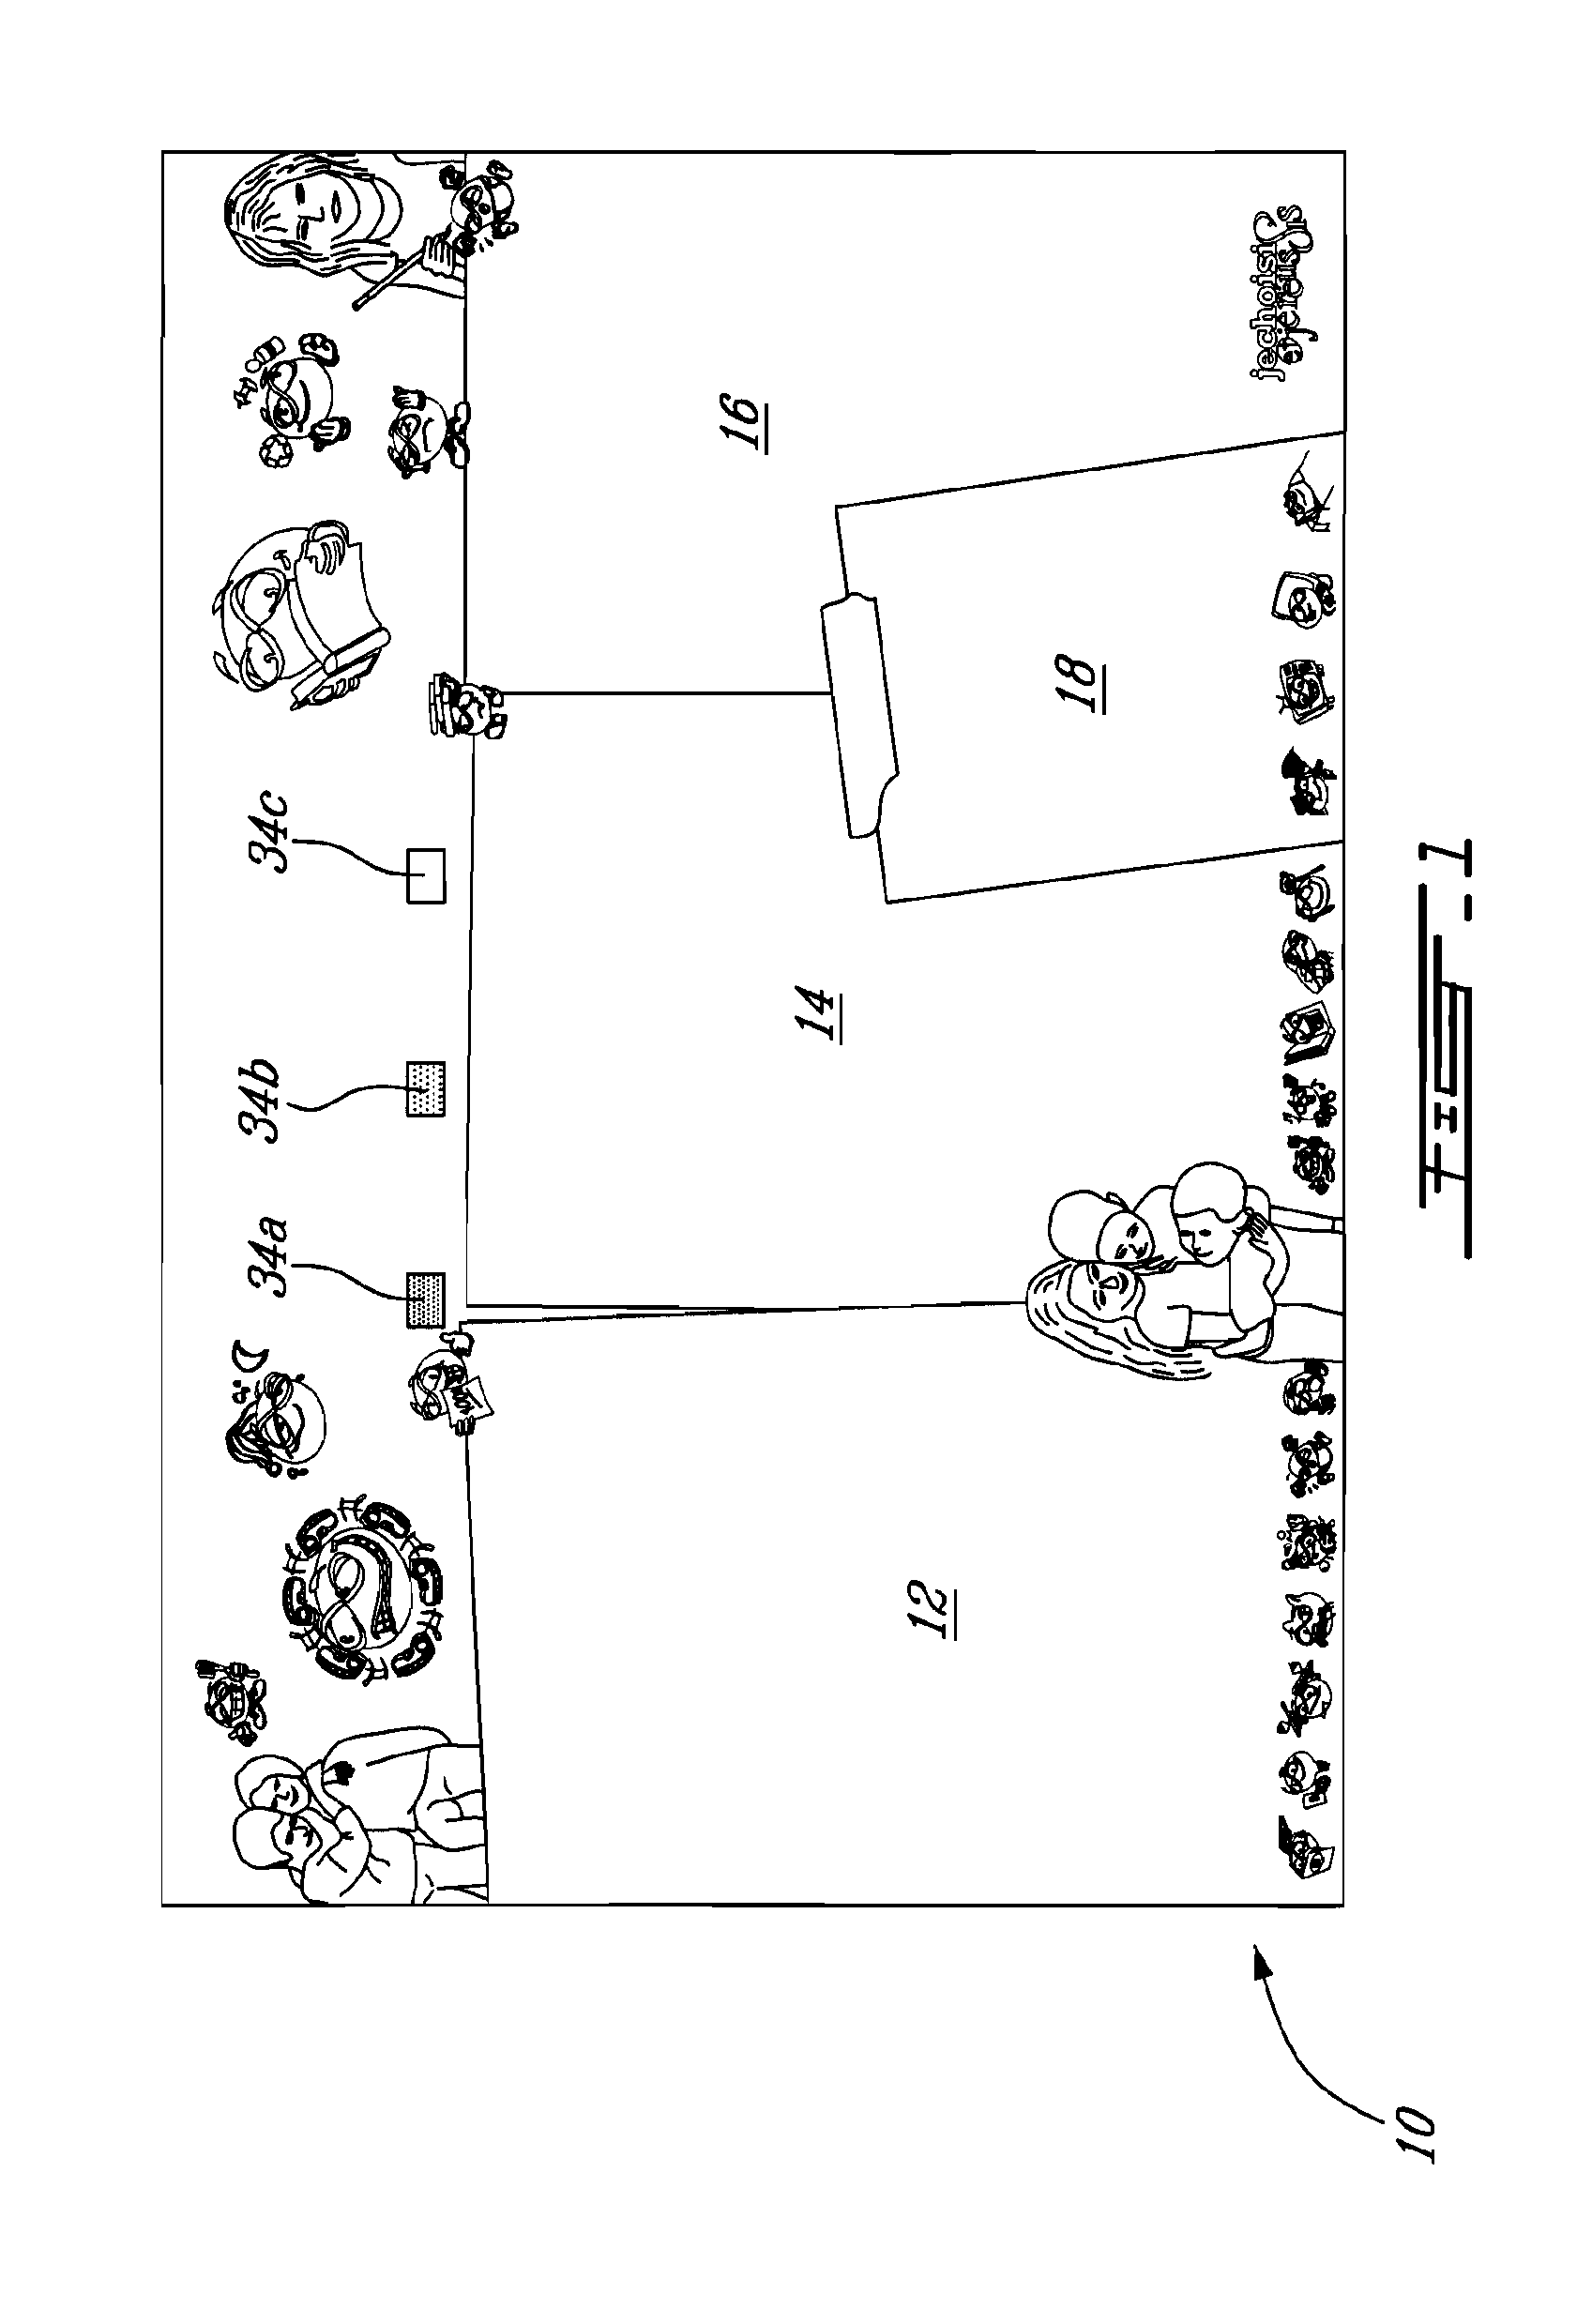 Apparatus and method for guiding people with attention deficit